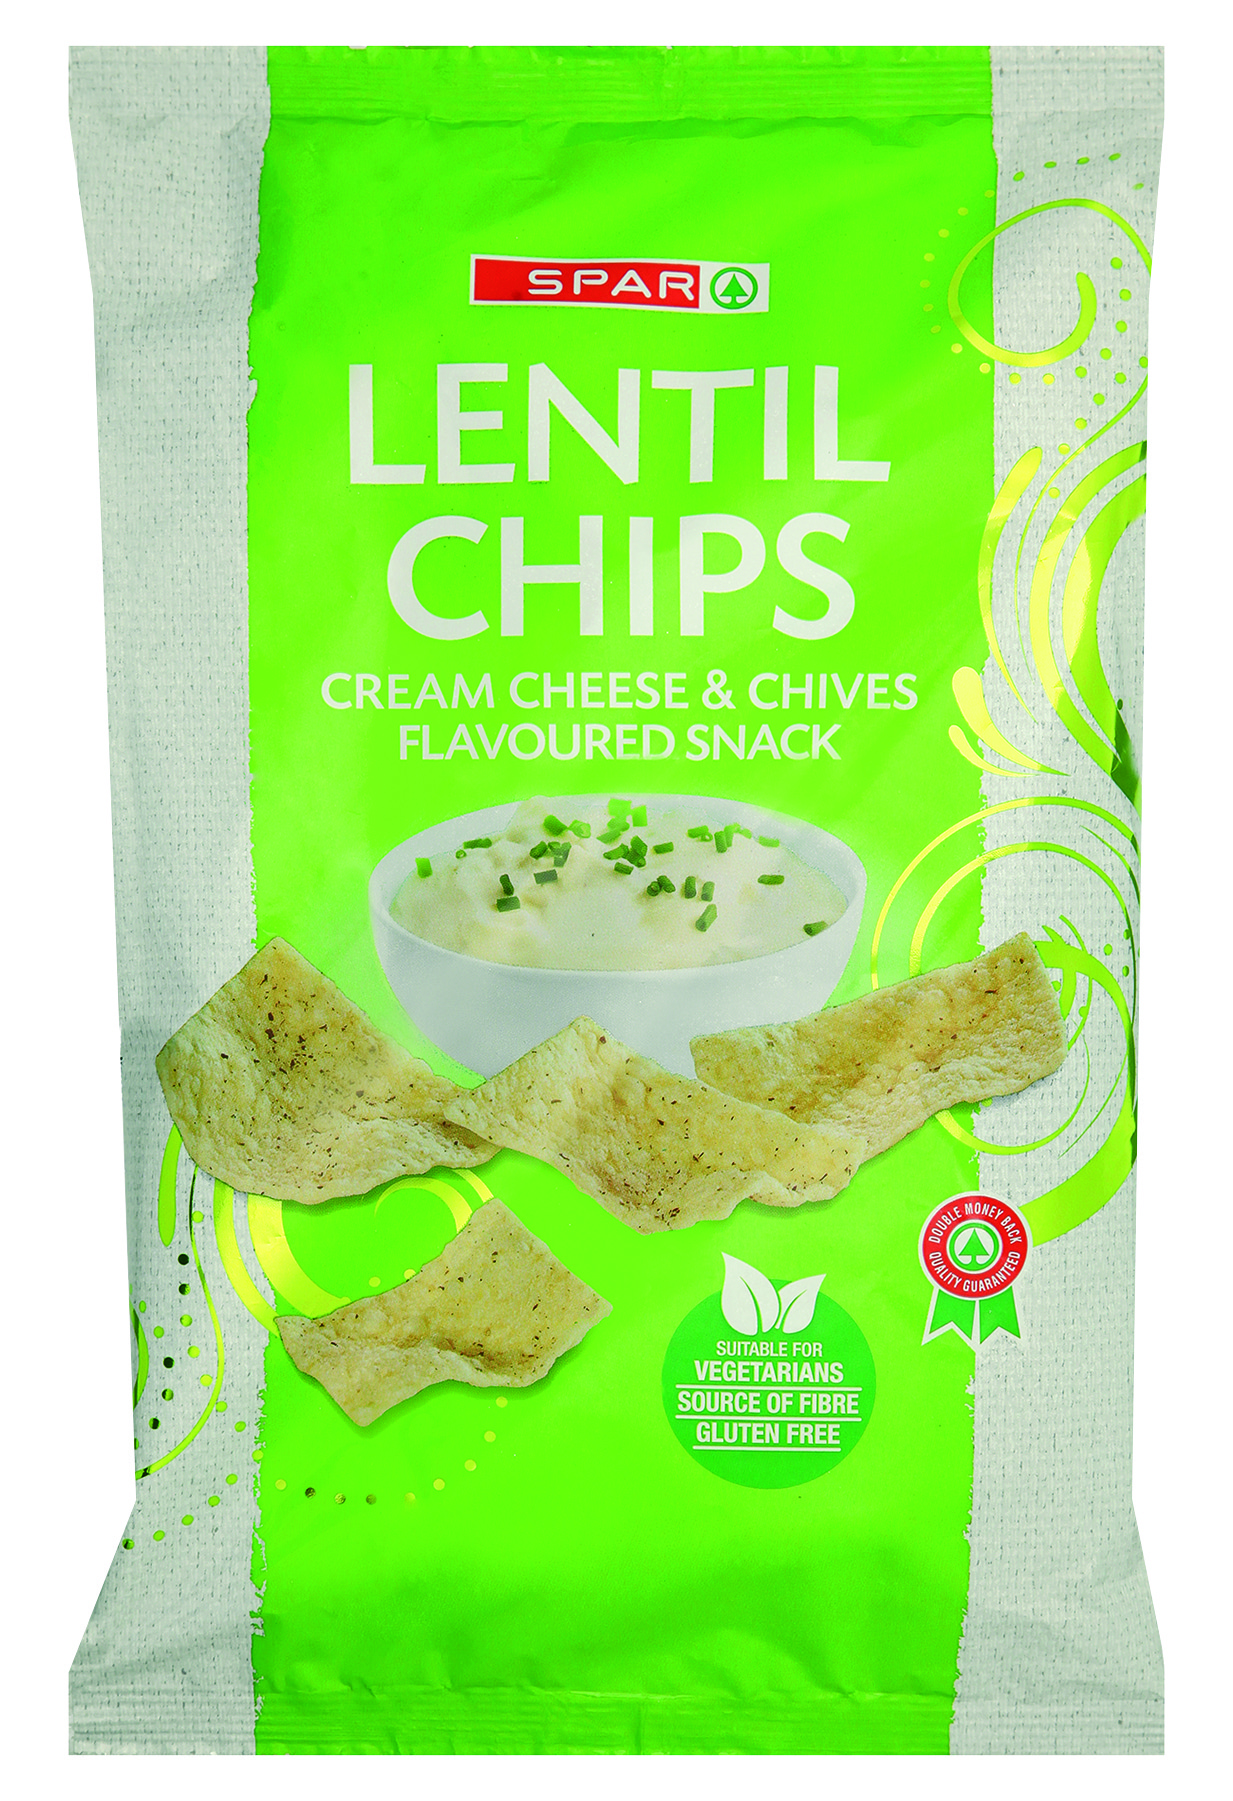 lentil chips cream cheese & chives flavoured